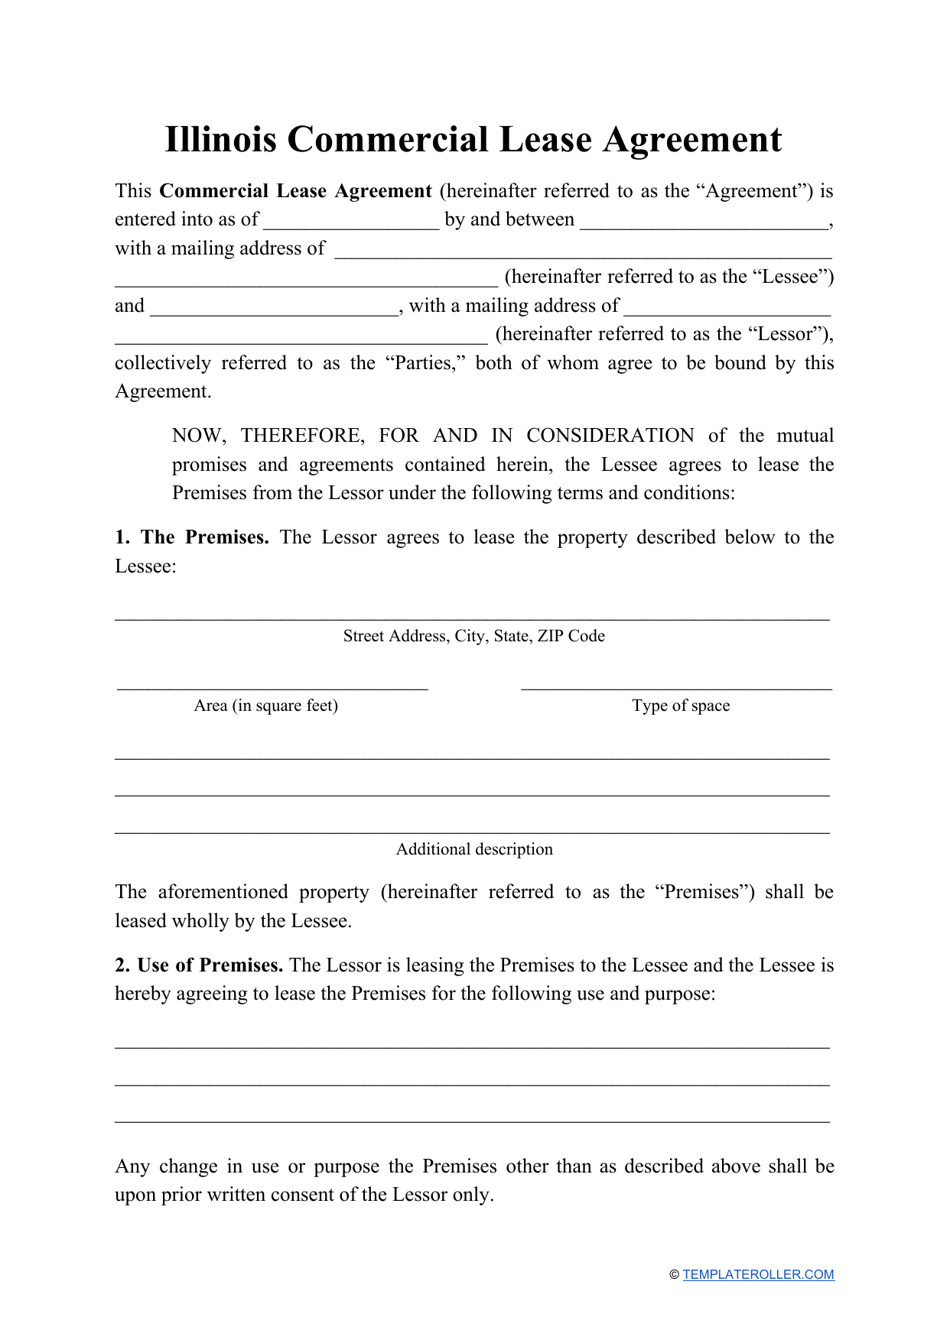 Illinois Commercial Lease Agreement Template Download Printable For Business Lease Agreement Template Free